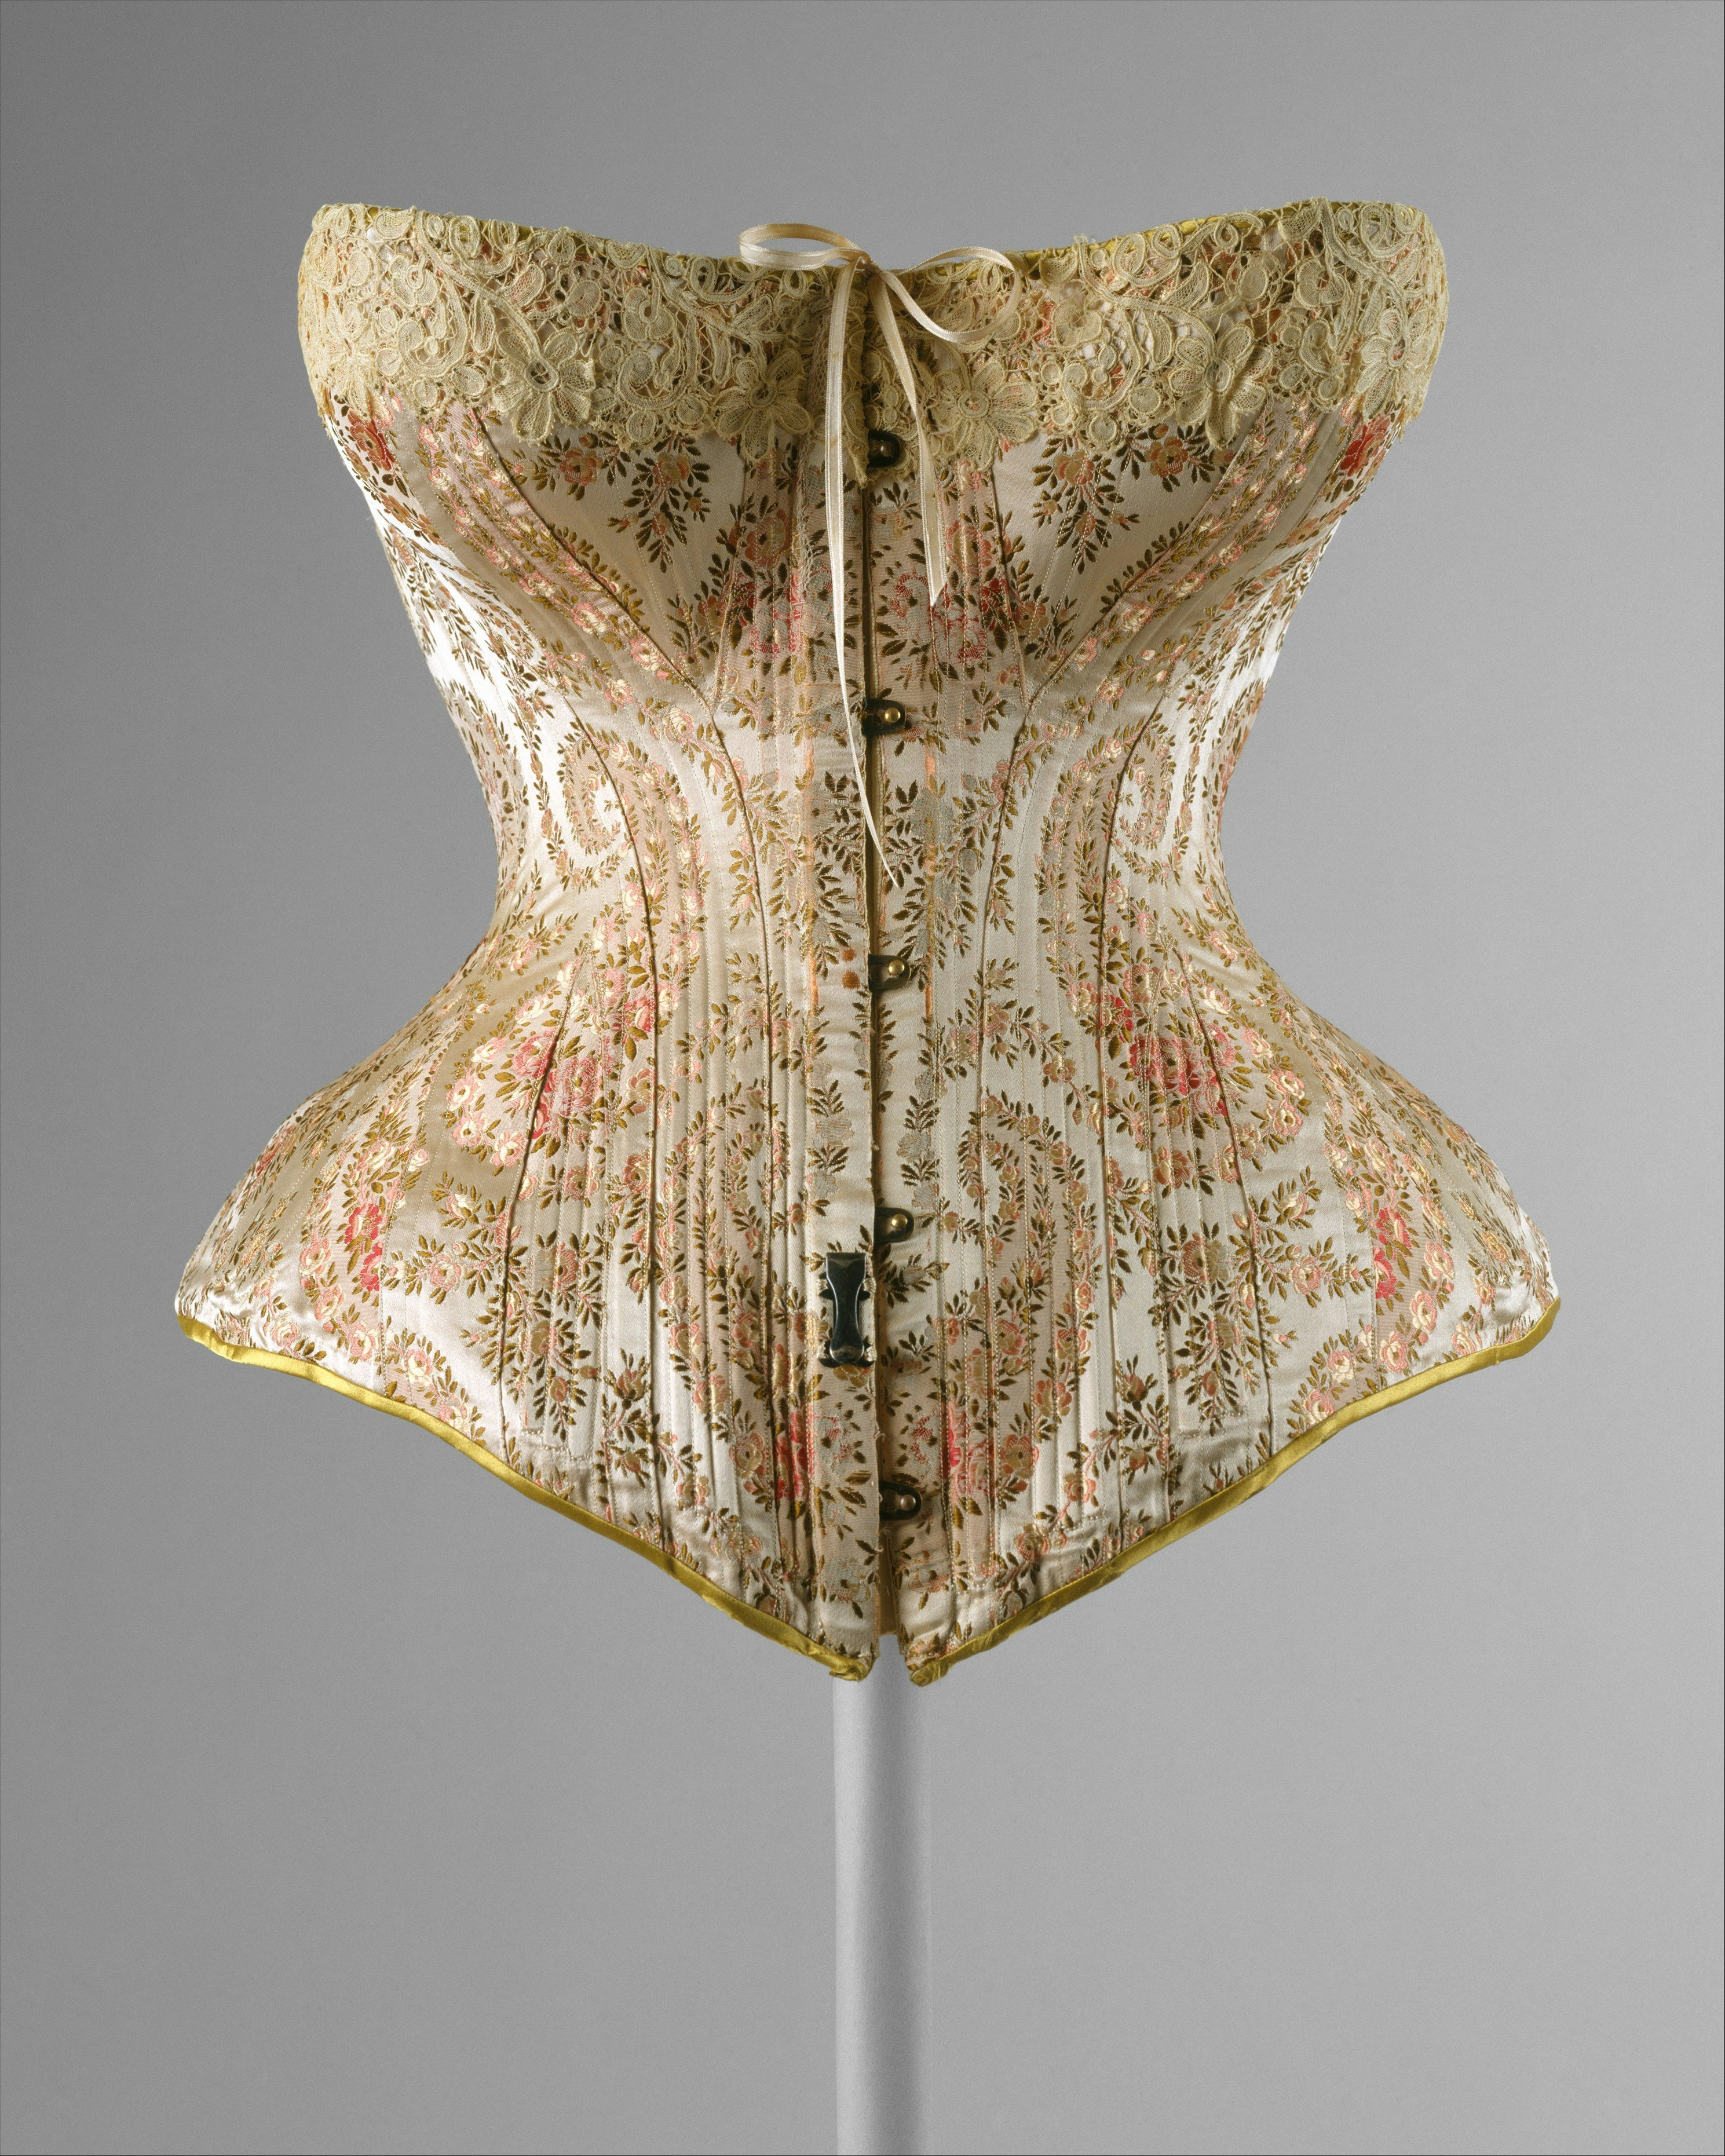 Remaking history: in hand-making 400-year-old corset designs, I was able to  really understand how they impacted women